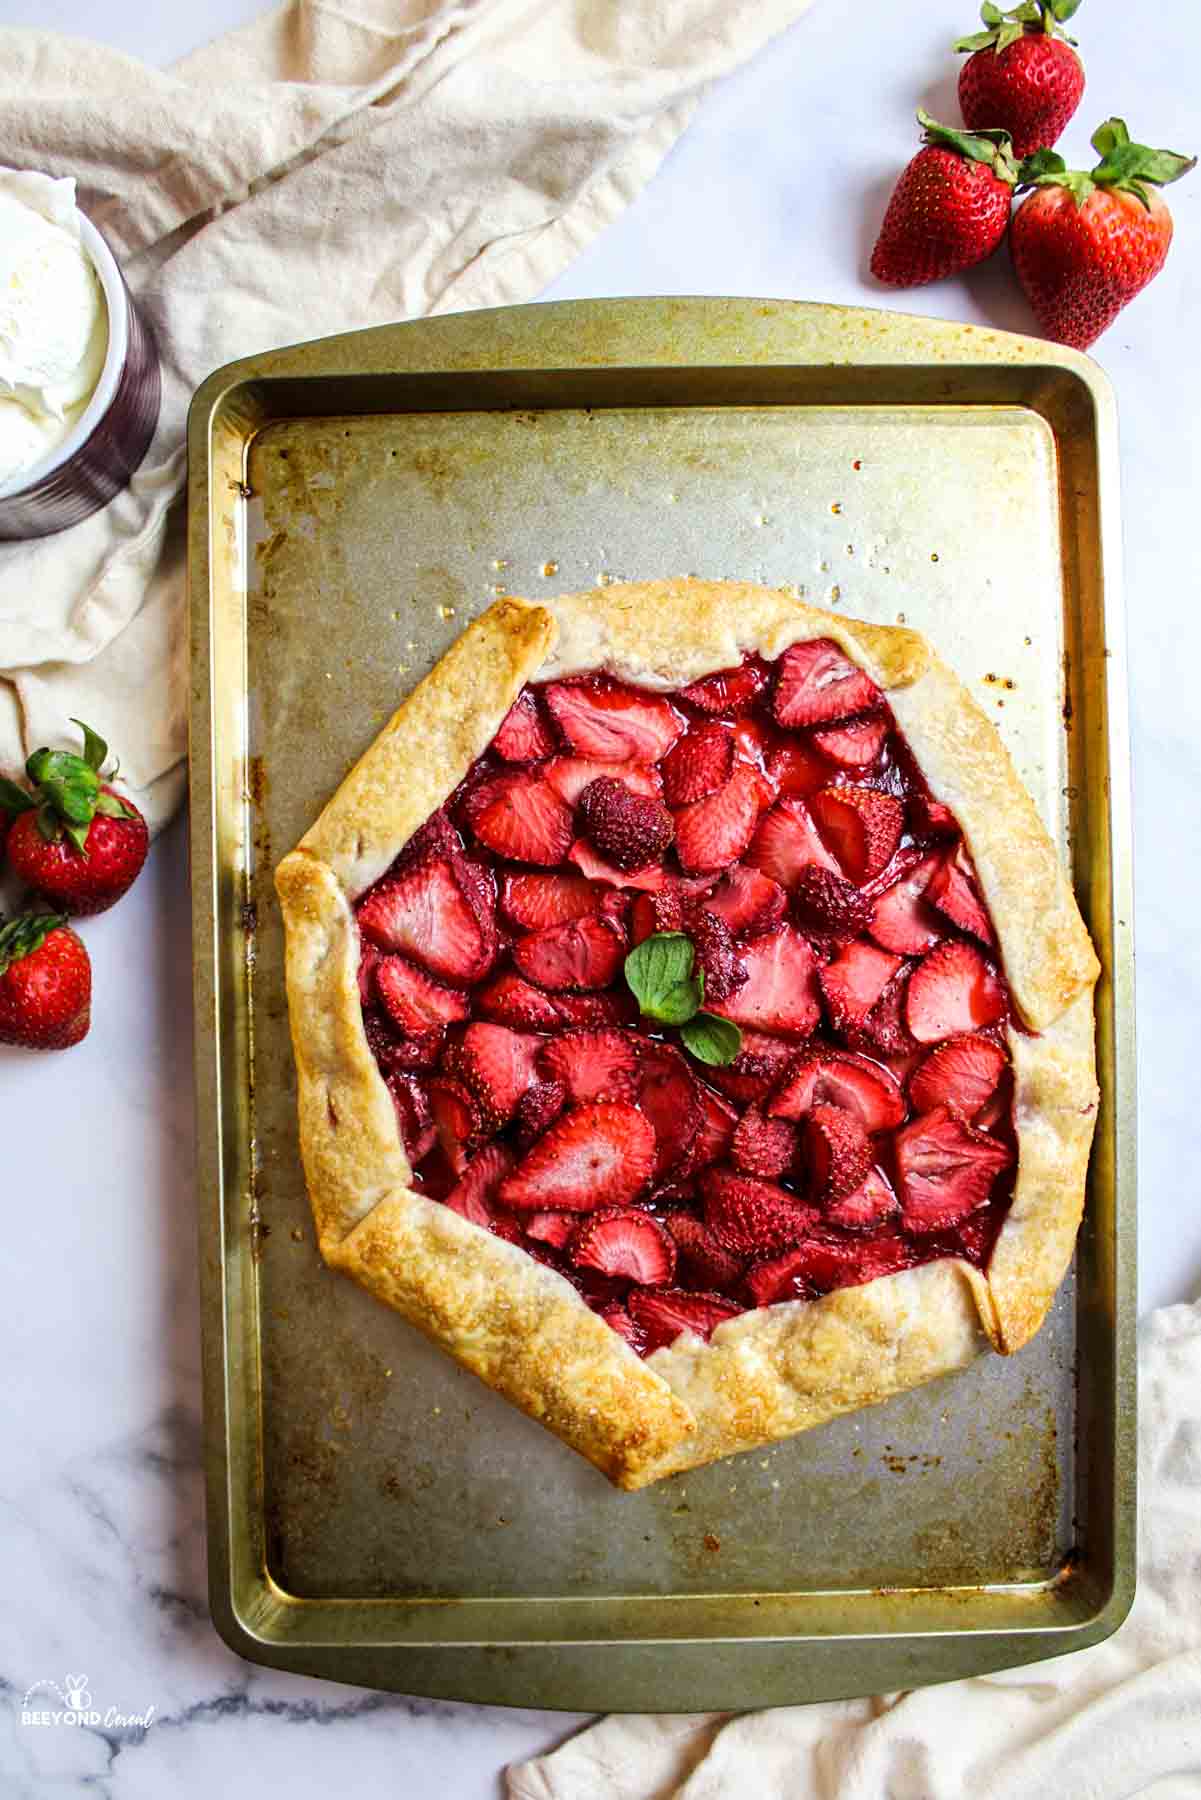 strawberry galette on a baking sheet with fresh berries, cream, and kitchen towel around it.